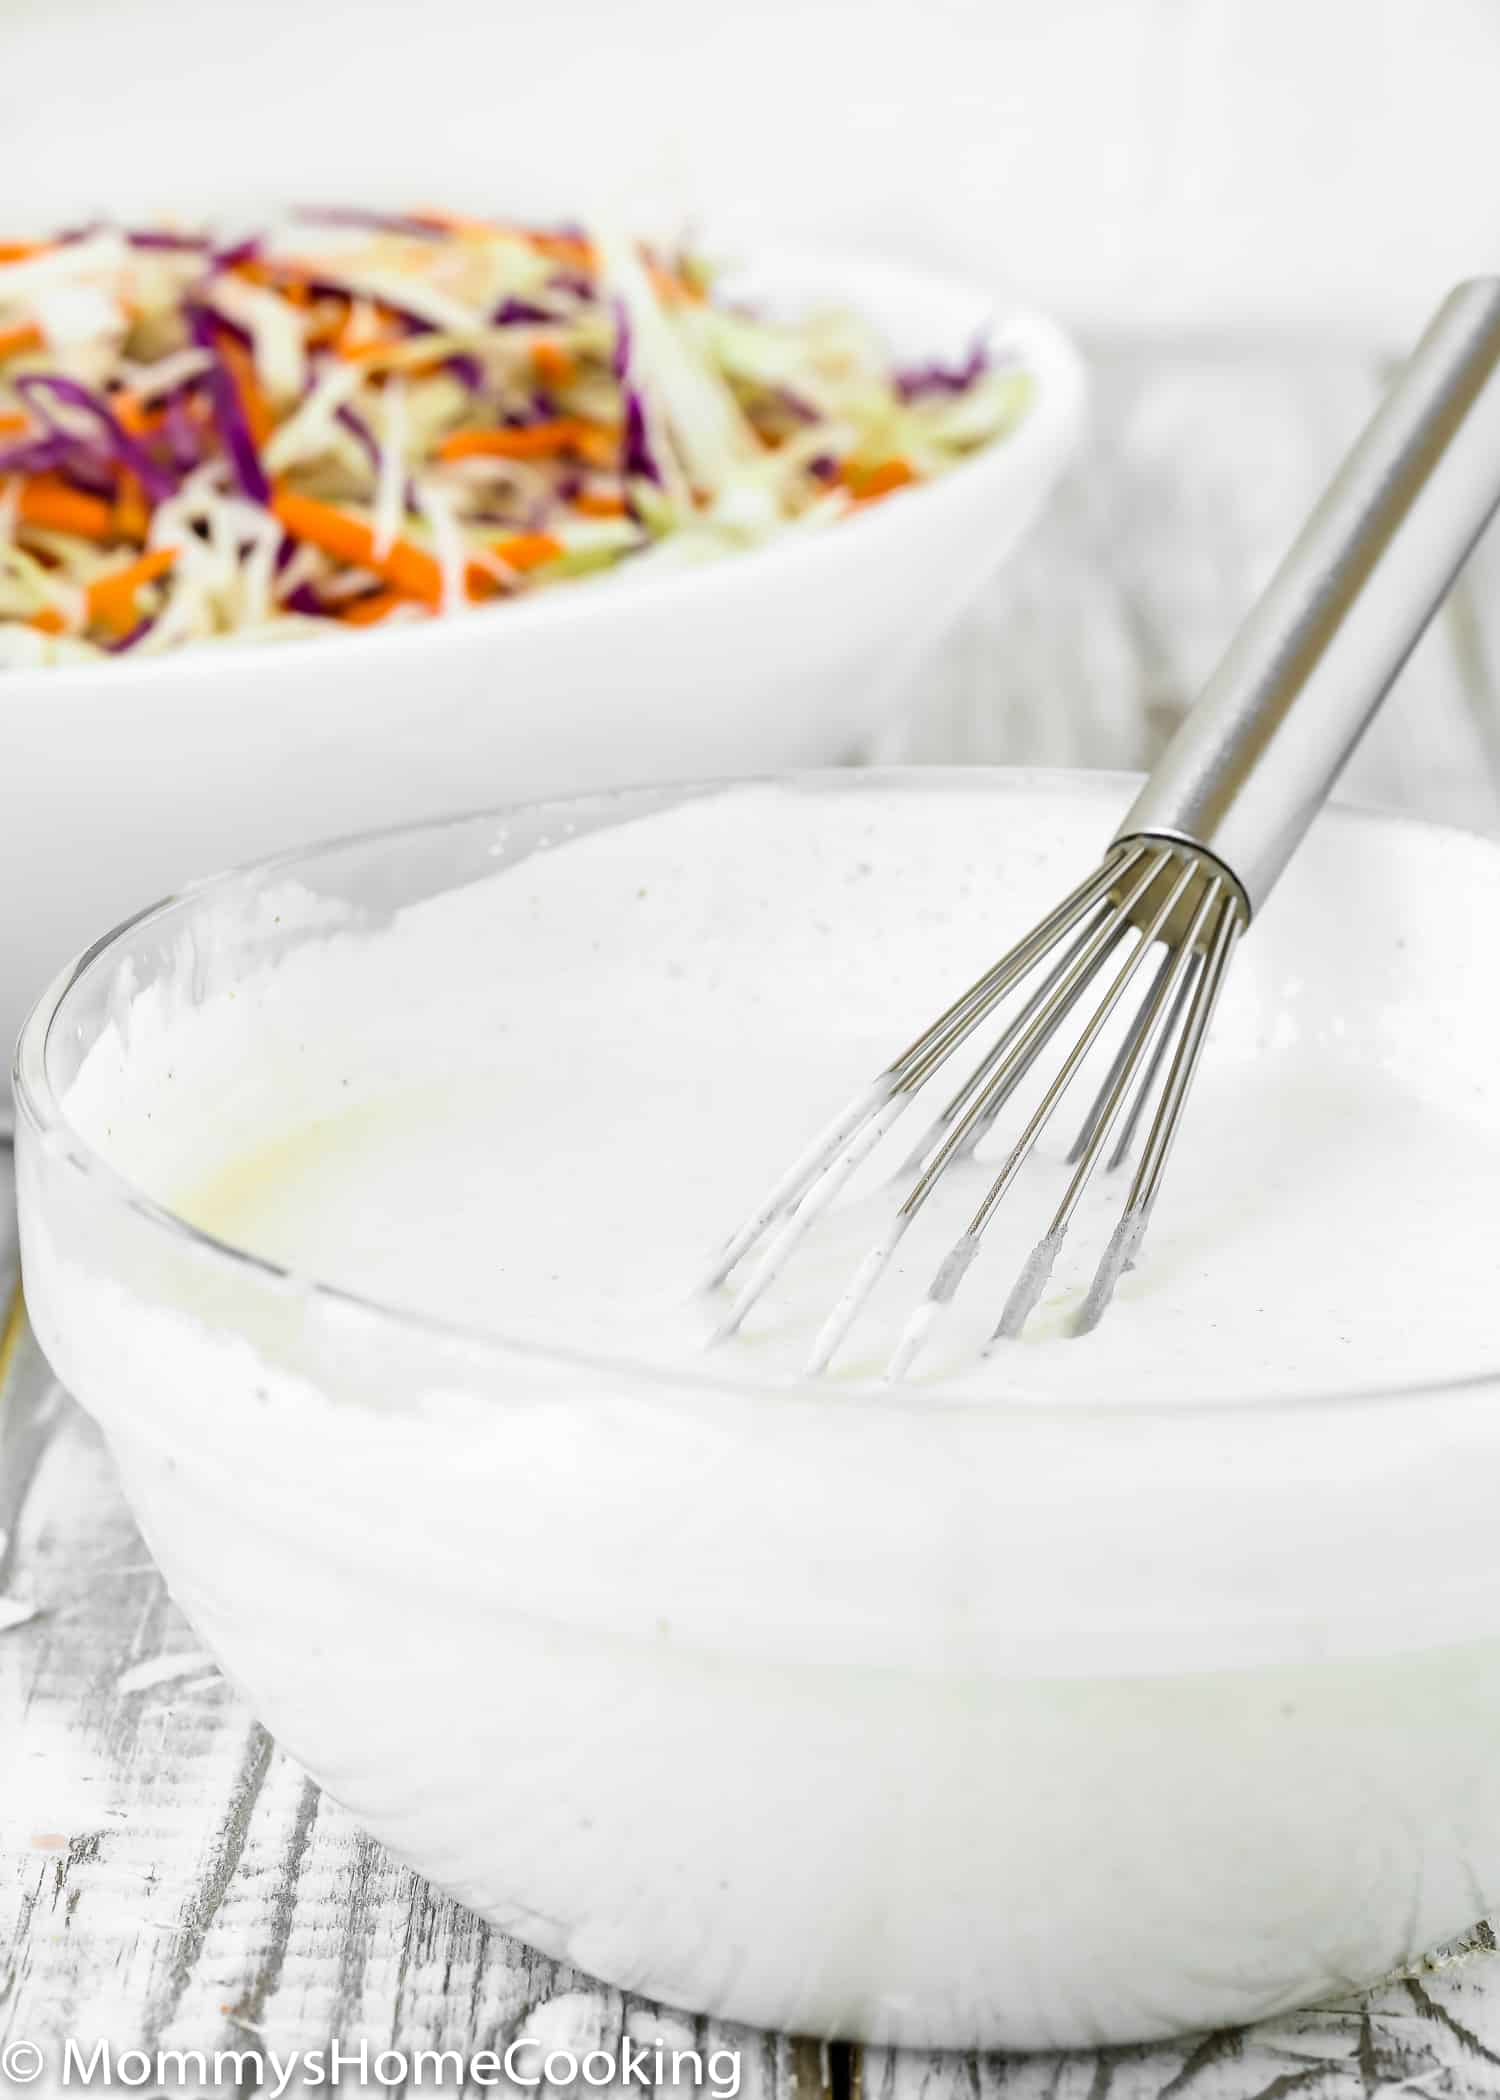 This Buttermilk Salad Dressing is quick, simple, creamy and epically delicious!! Perfect to dress coleslaw, mixed greens, cold pasta salads, steamed broccoli or asparagus spears, as a dip for crunchy vegetables, chips, or sweet potato fries. So much better than any store-bought dressing. https://mommyshomecooking.com